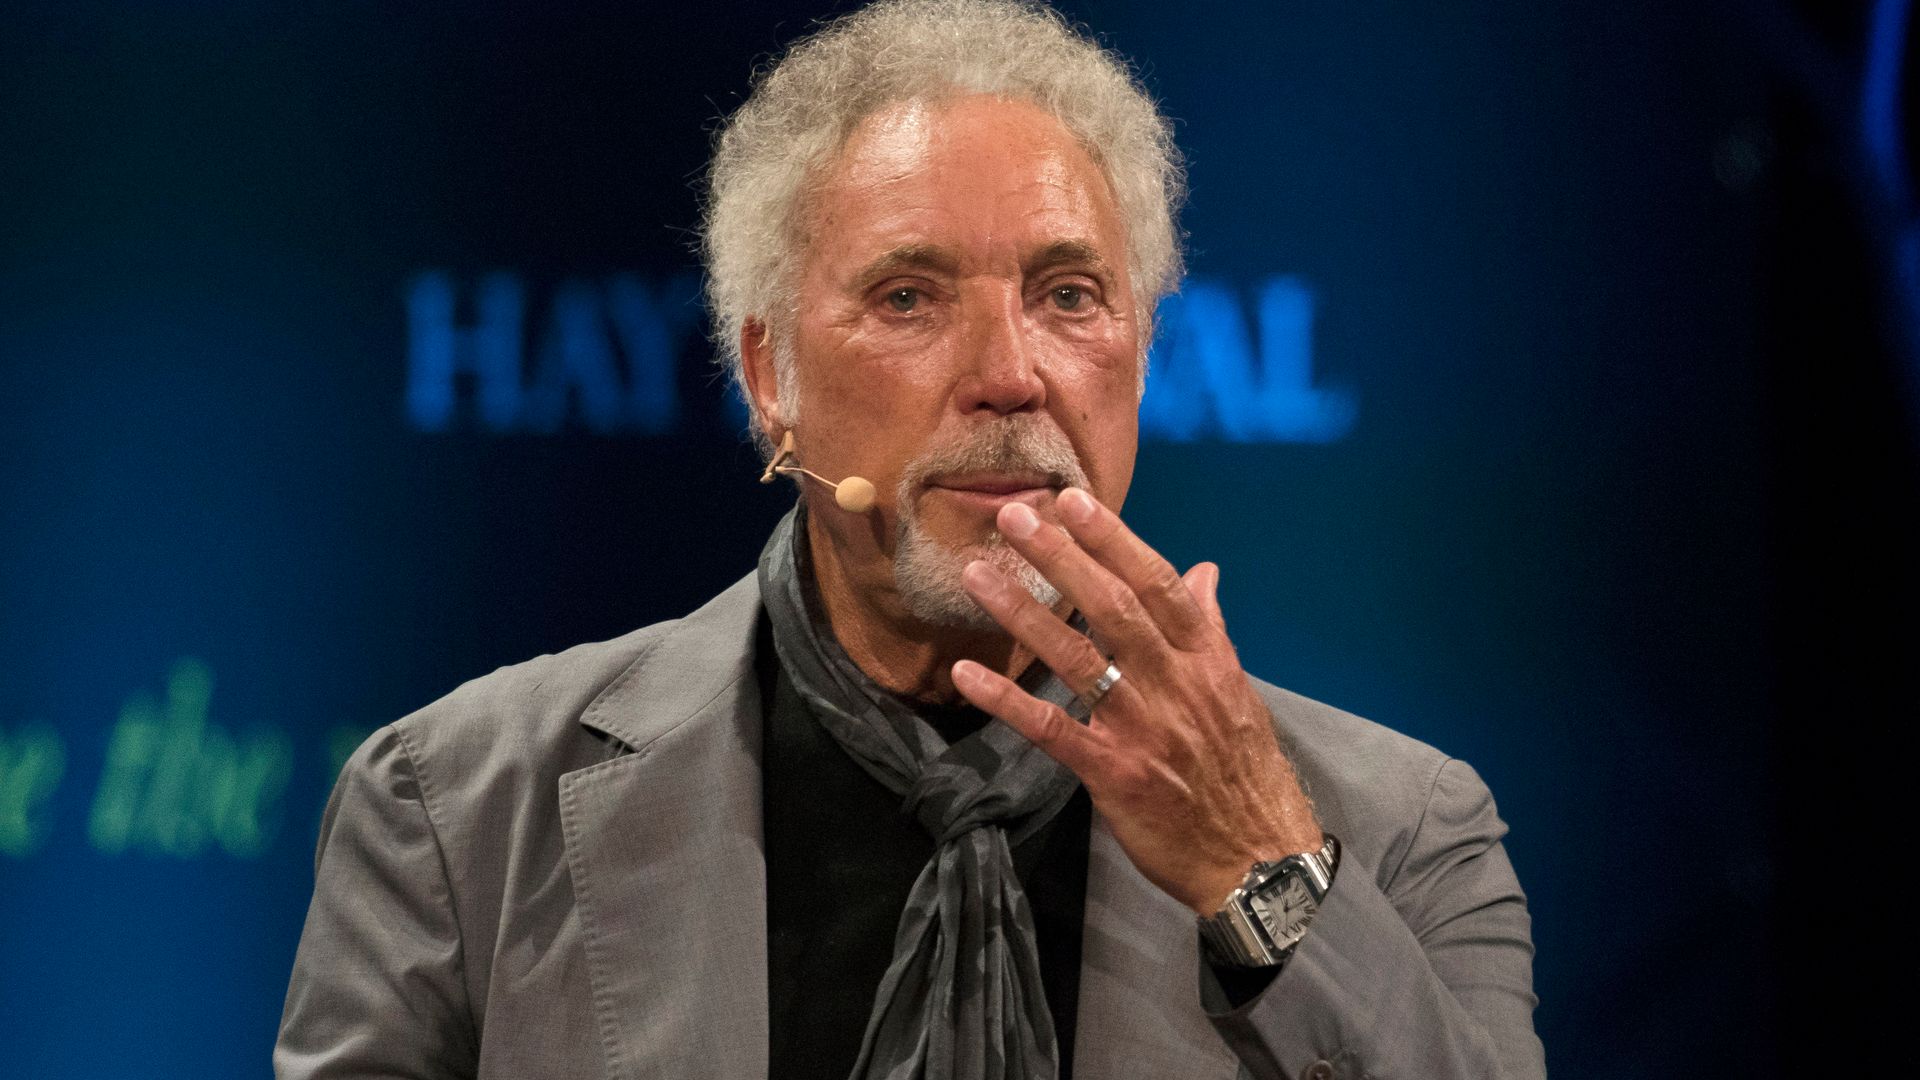 Sir Tom Jones in 2016, making his first public appearance since the death of his wife Lady Melinda Rose